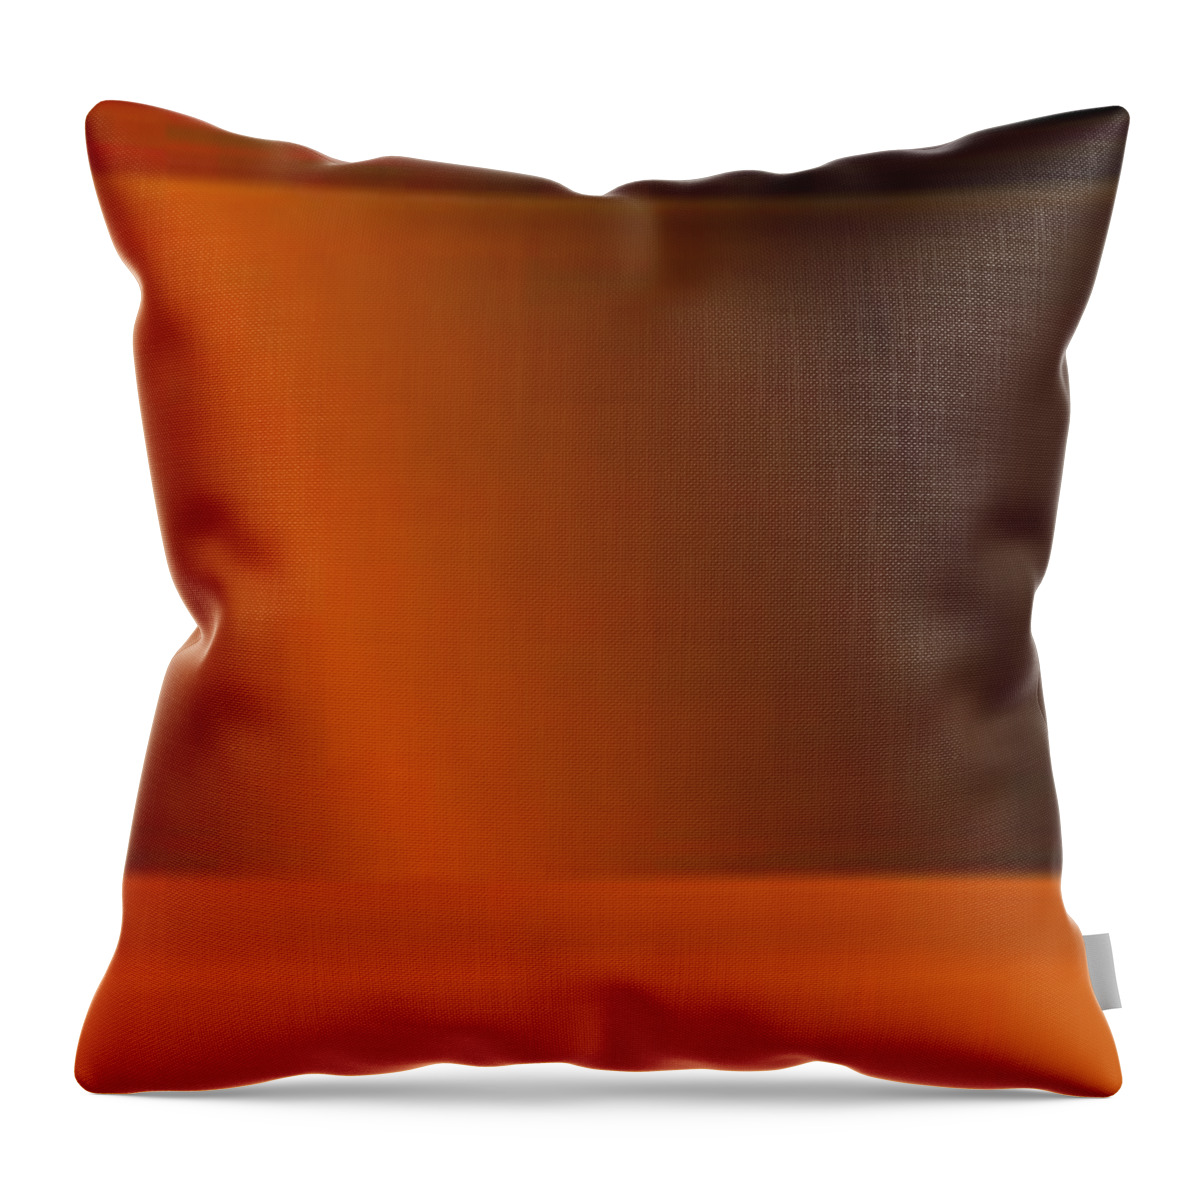 Oil Throw Pillow featuring the painting Orange Light by Matteo TOTARO